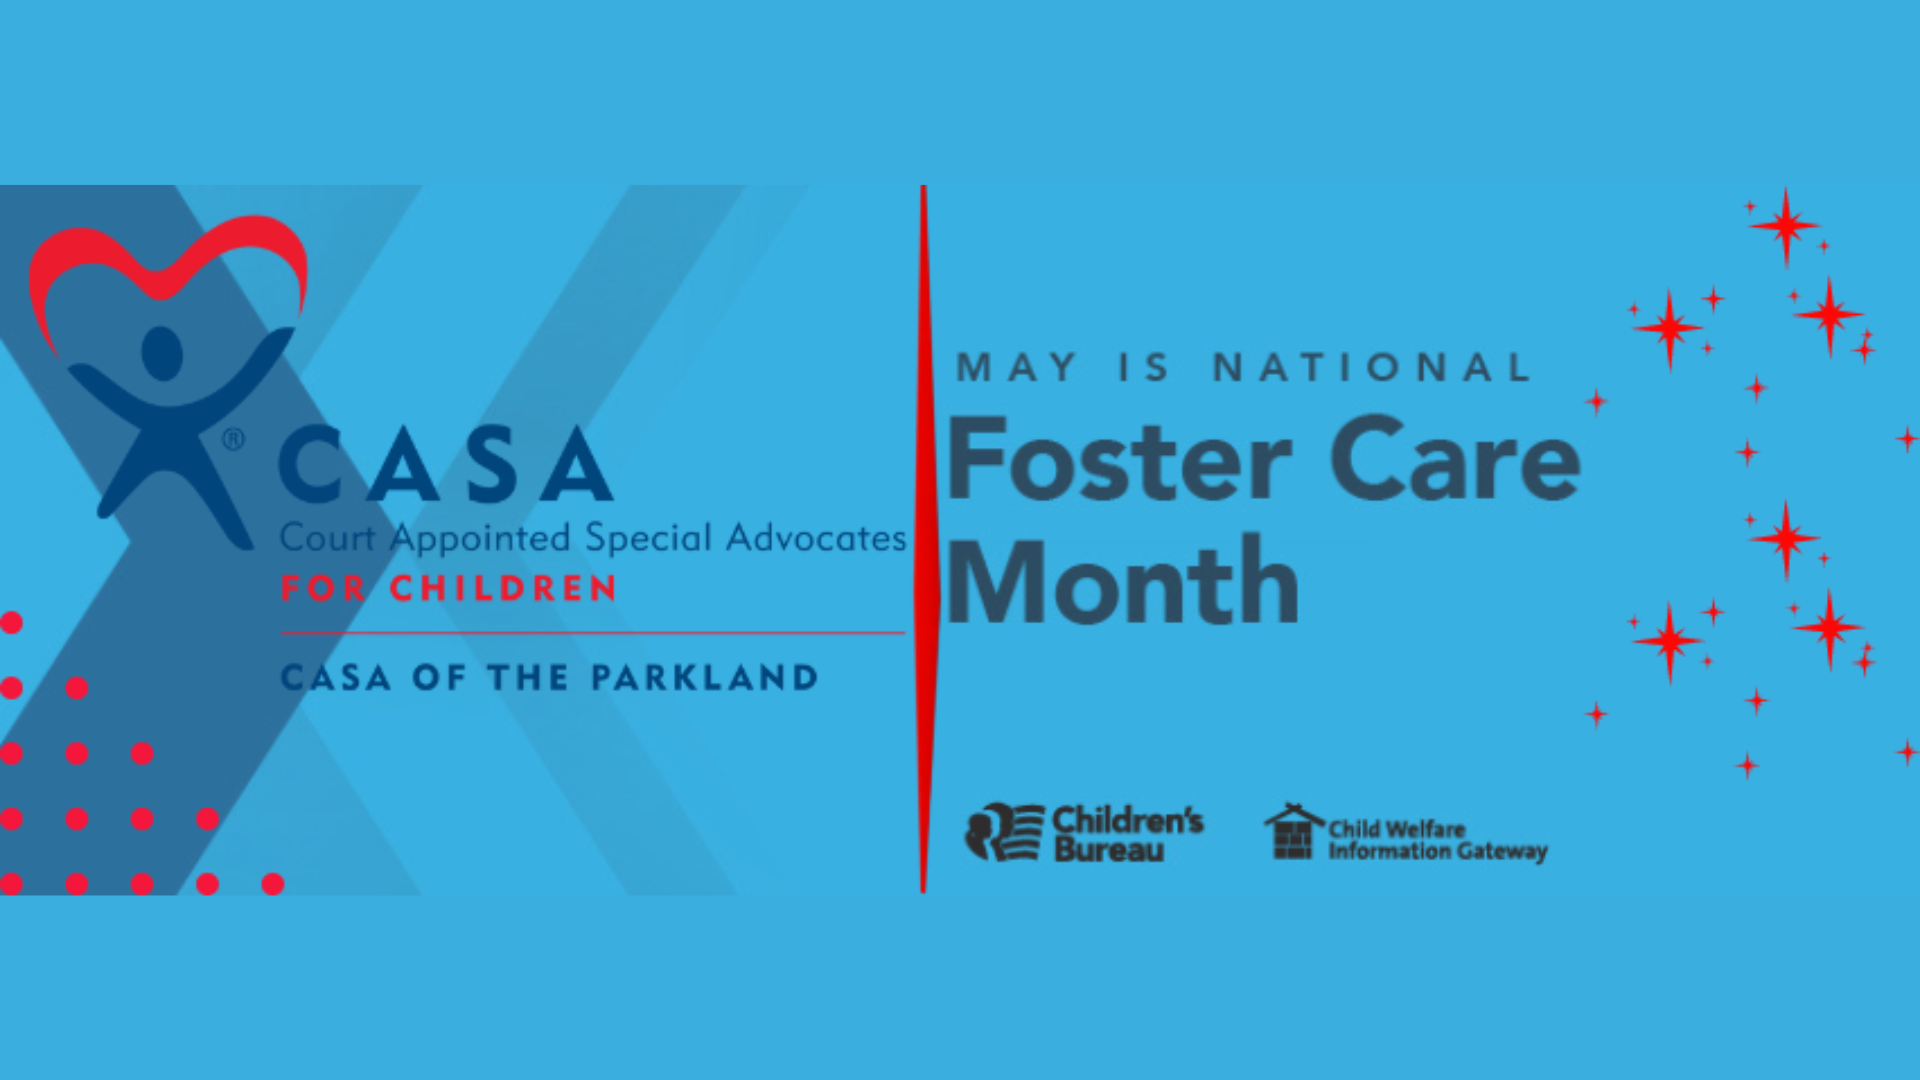 It's National Foster Care Month